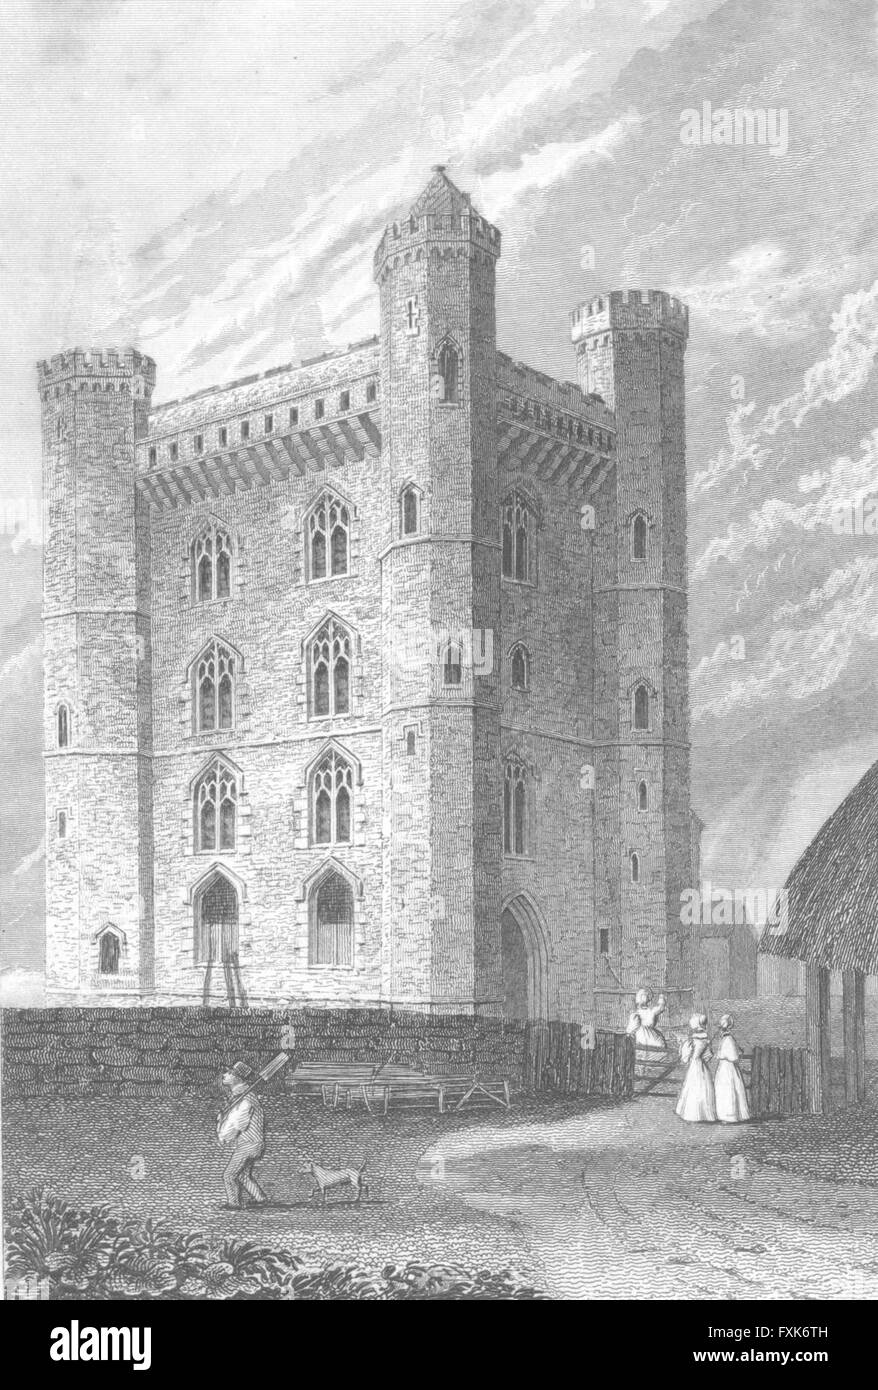 LINCS: Tattershall Castle: Saunders, antica stampa 1836 Foto Stock